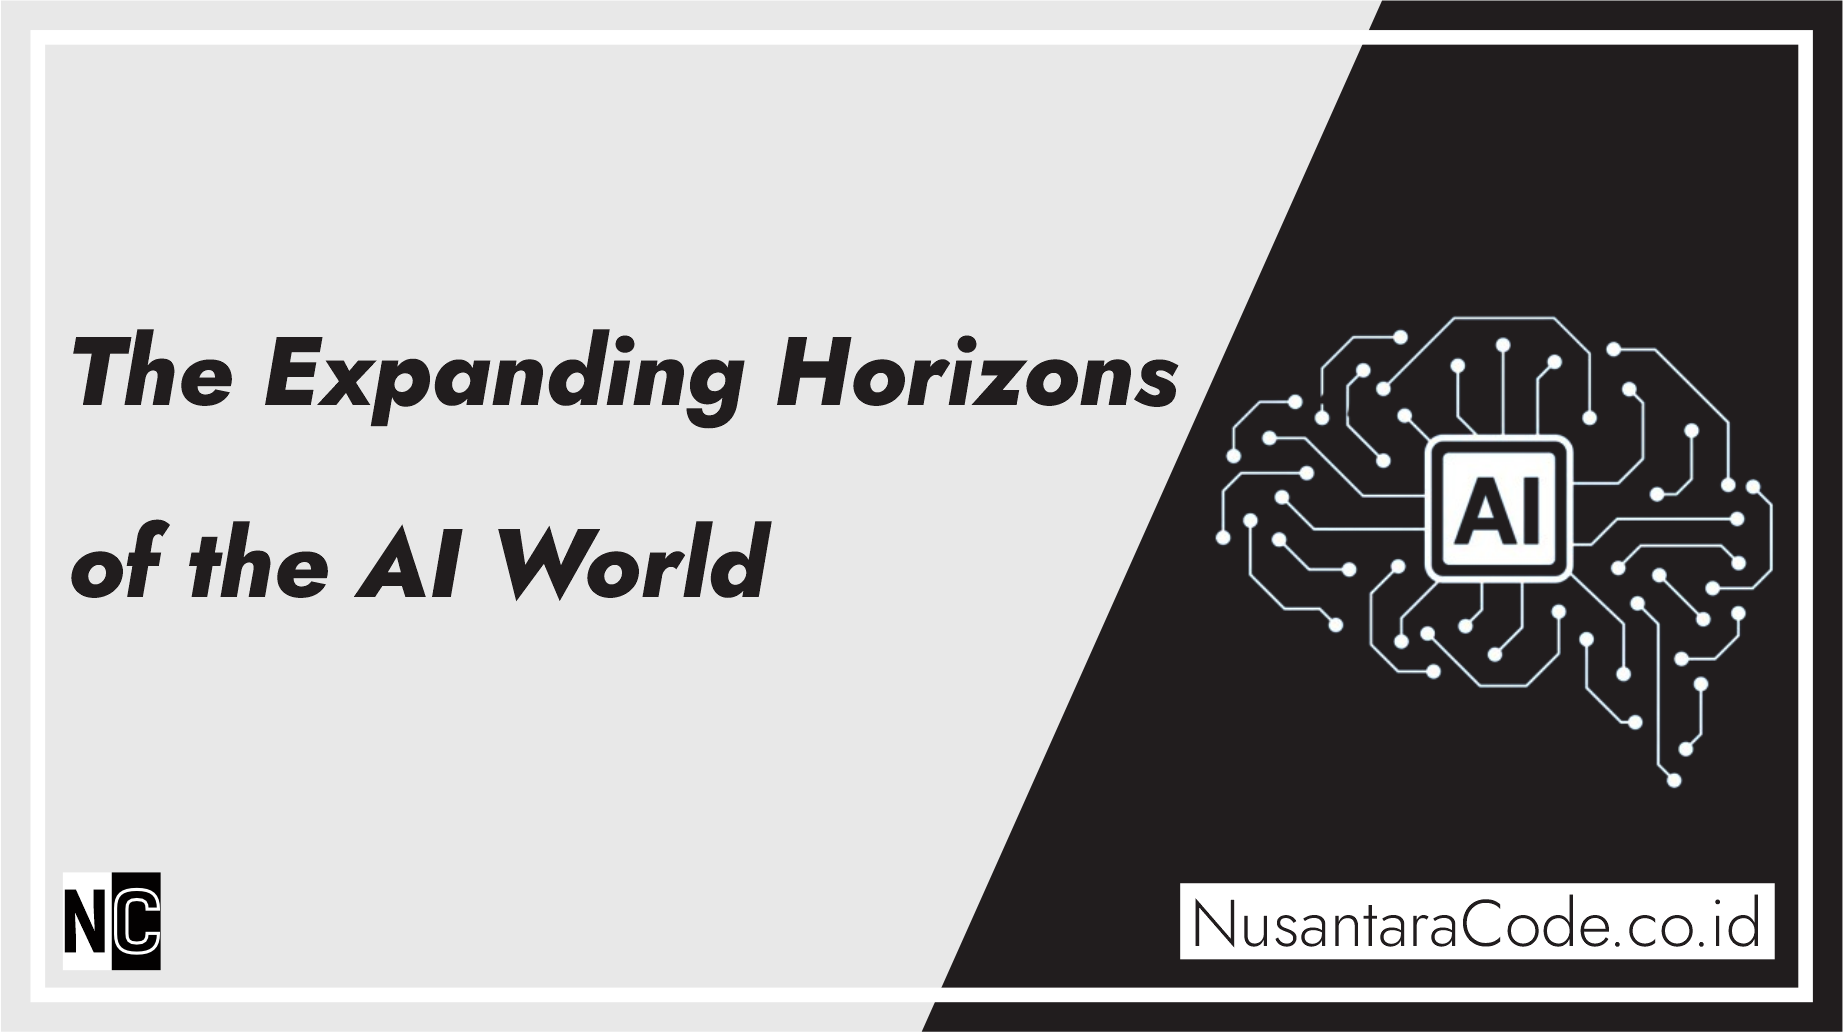 The Expanding Horizons of the AI World